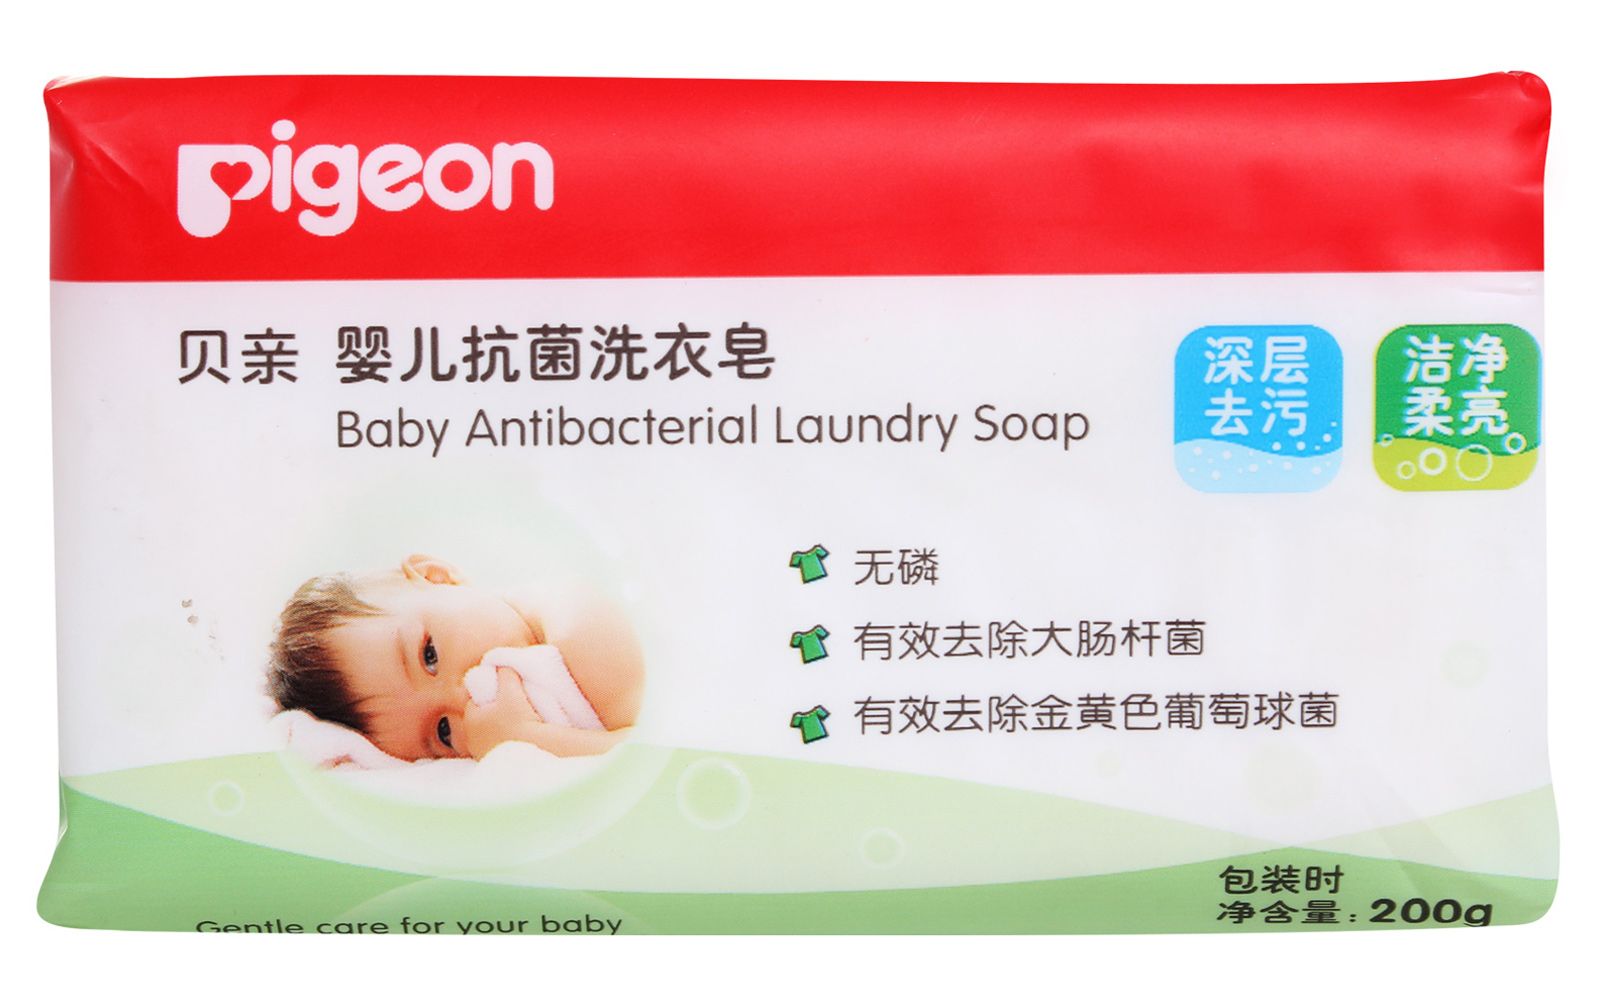 Pigeon - Baby Anti Bacterial Laundry Soap